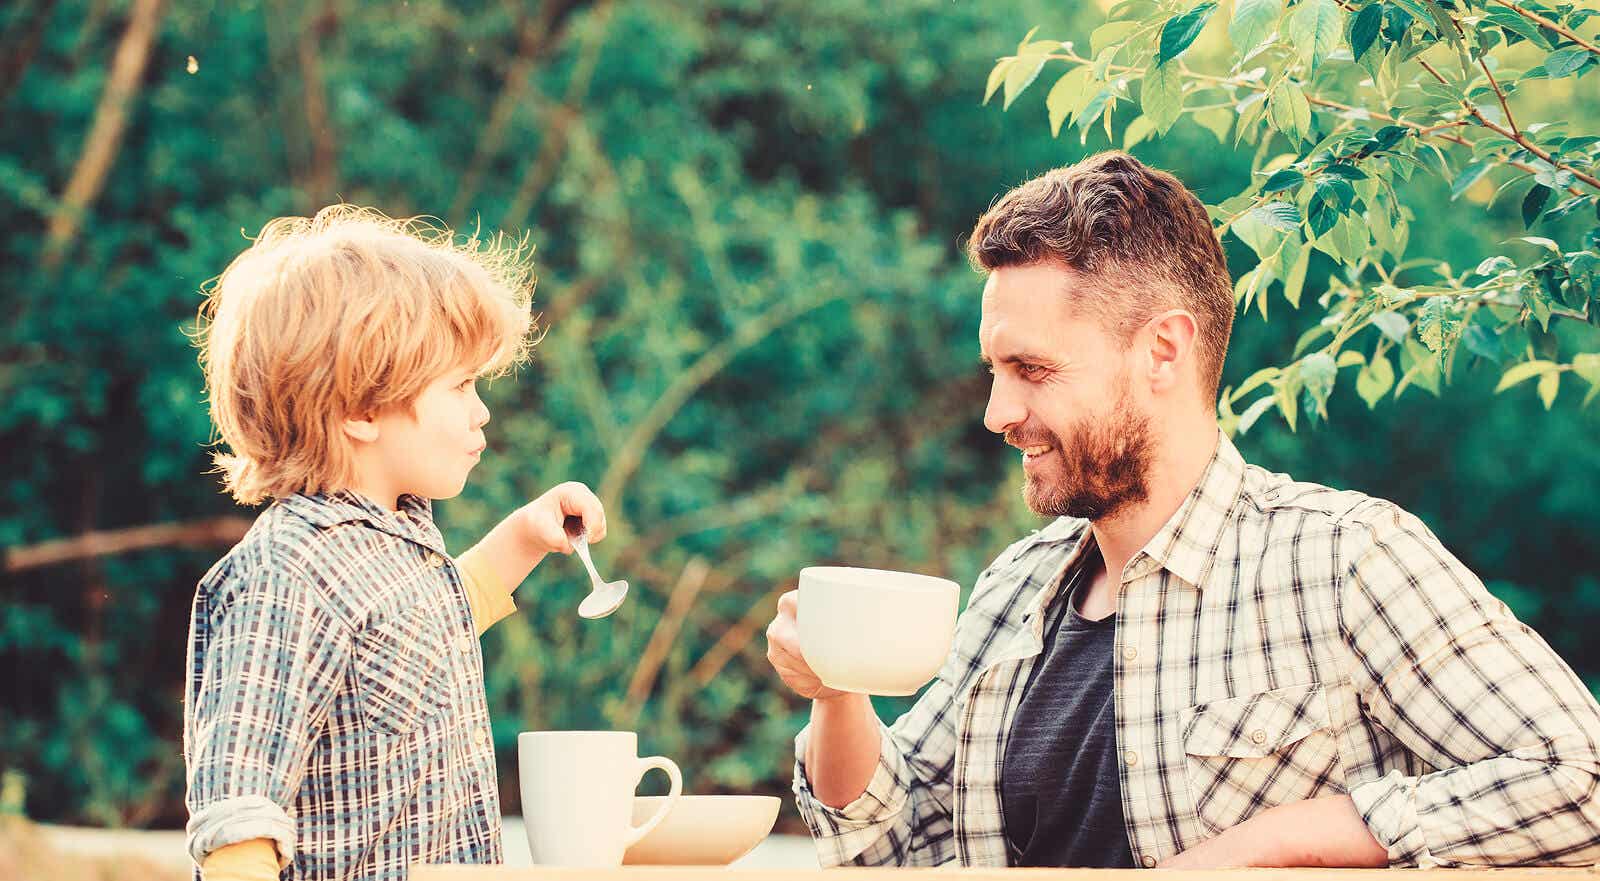 A father drinking having coffee with his son.